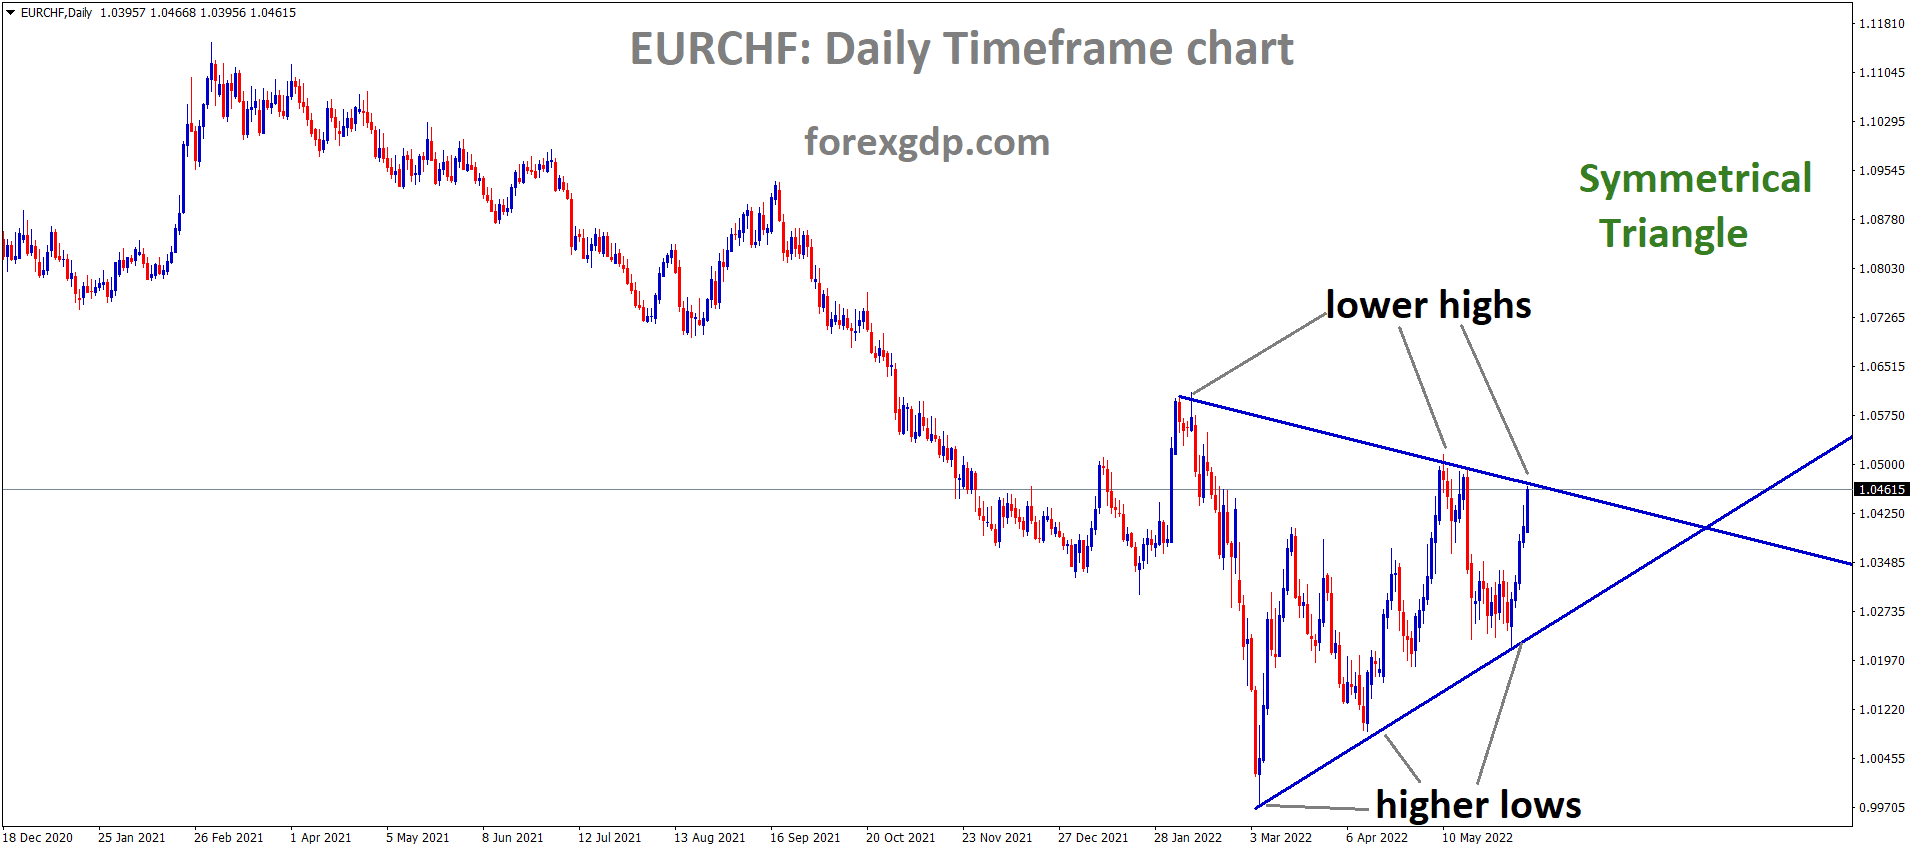 EURCHF is moving in the Symmetrical triangle pattern and the market has reached the Lower high area of the Pattern